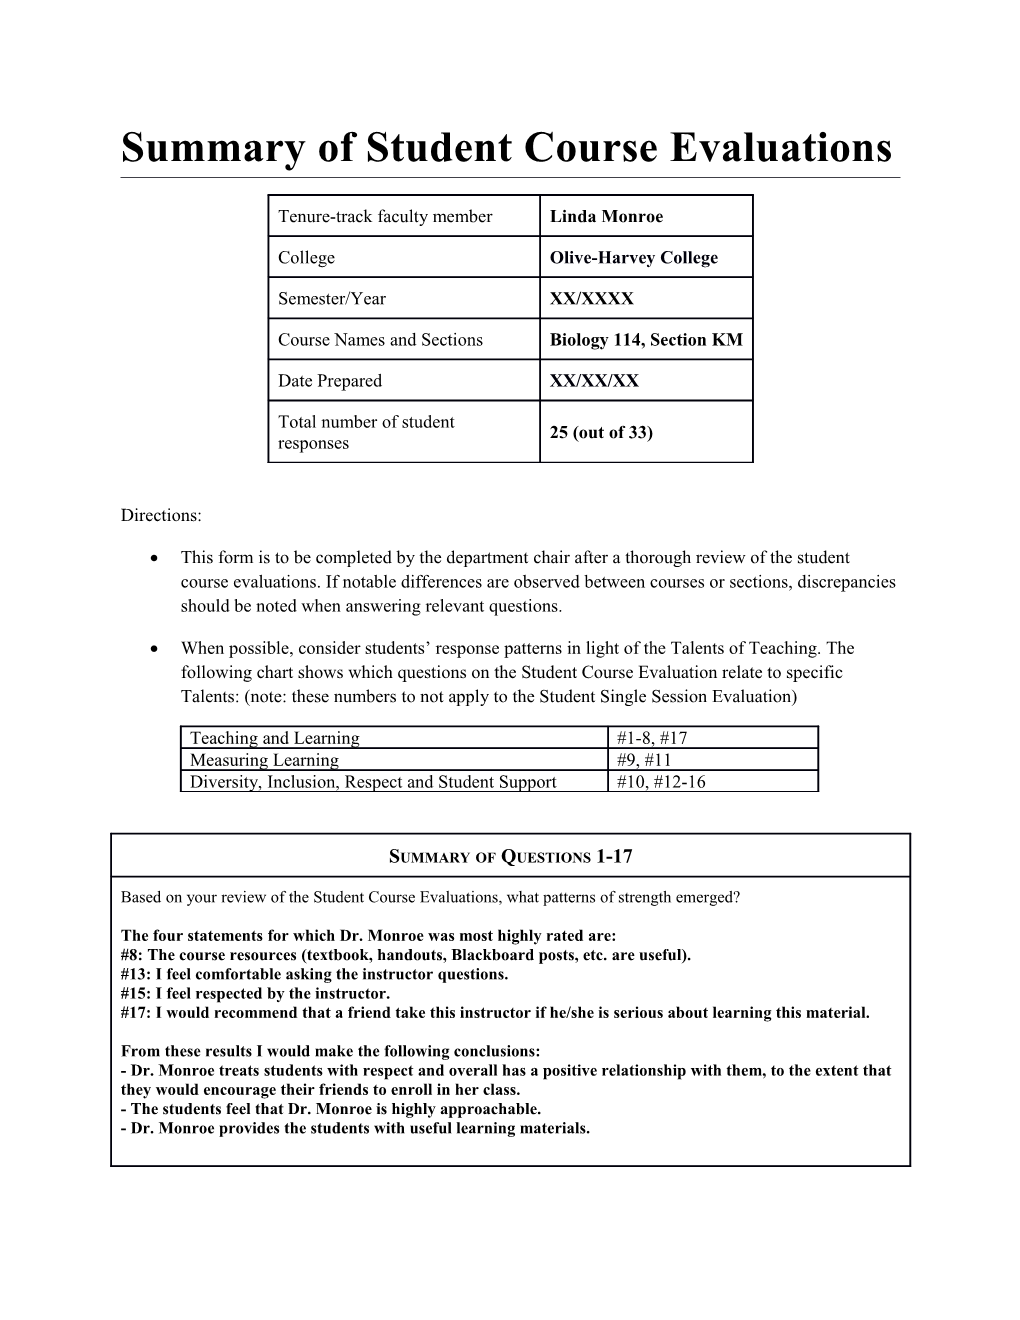 Summary of Student Course Evaluations